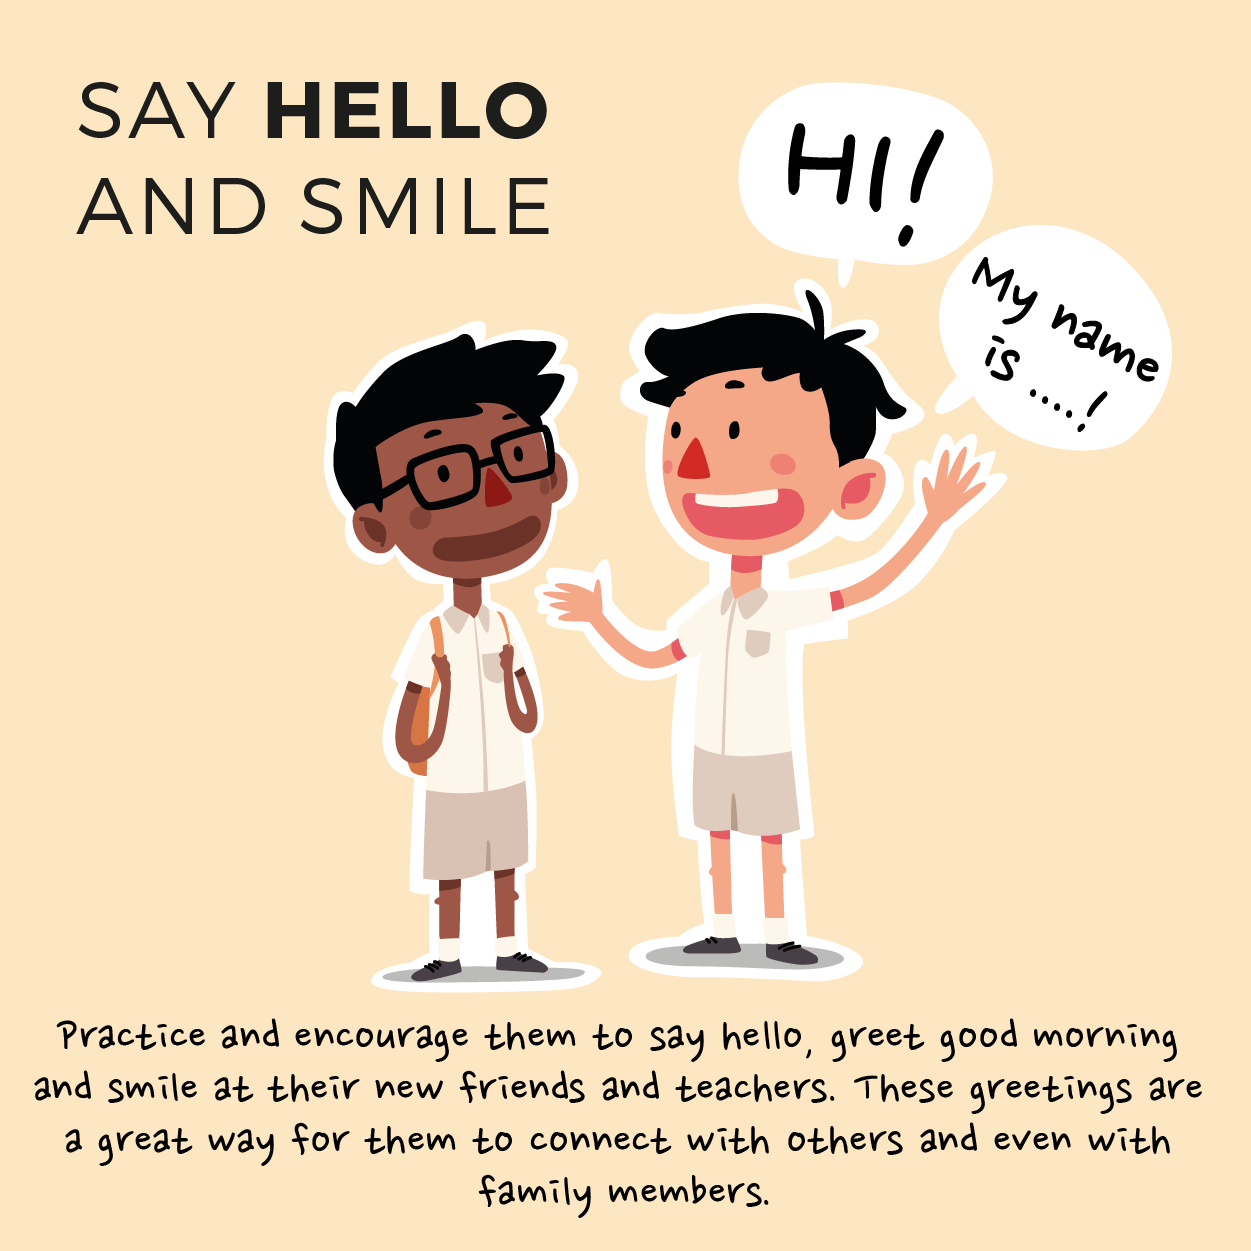 Say hello and smile